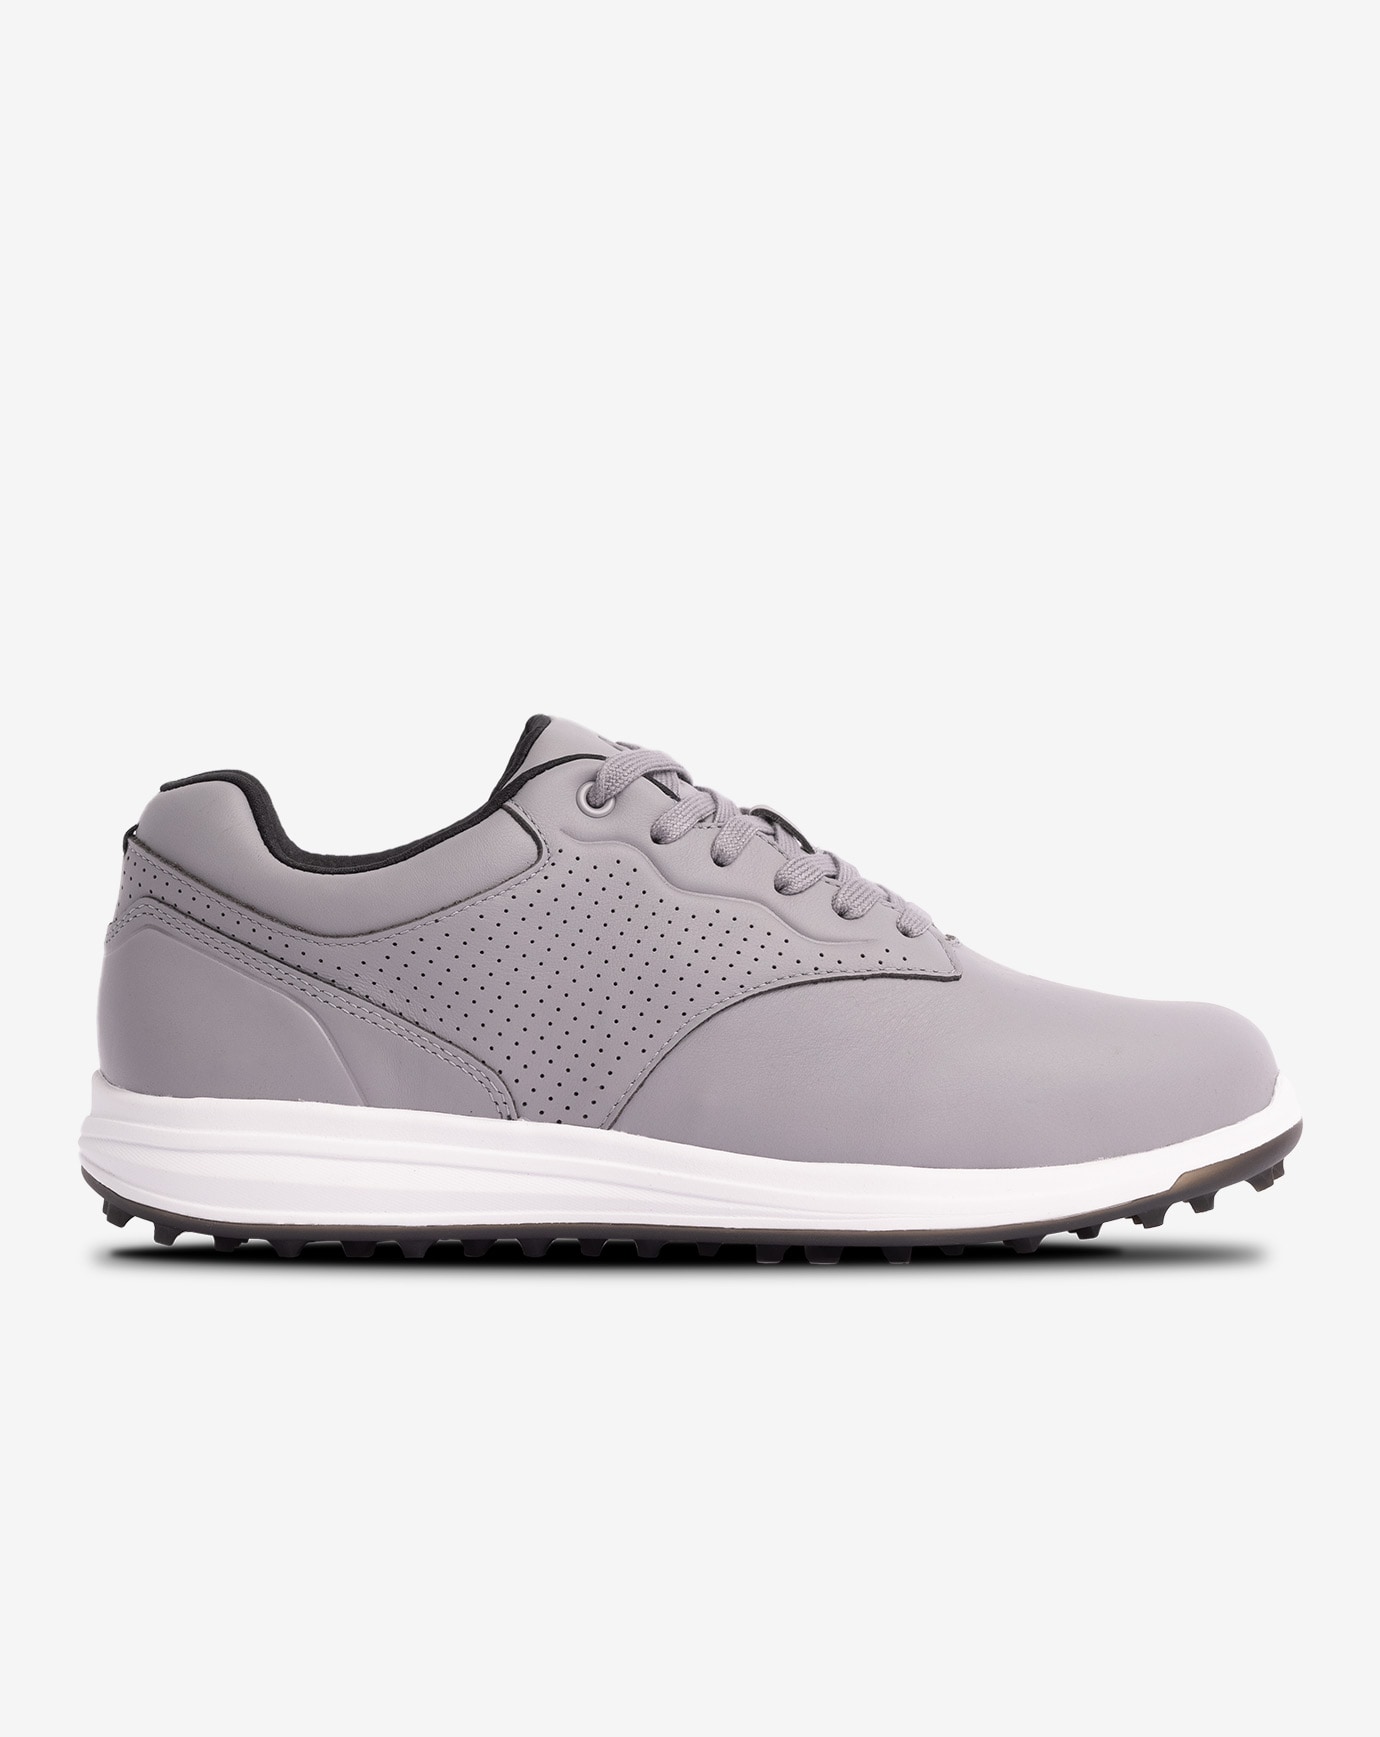 THE MONEYMAKER LUX SPIKELESS GOLF SHOE Image 3